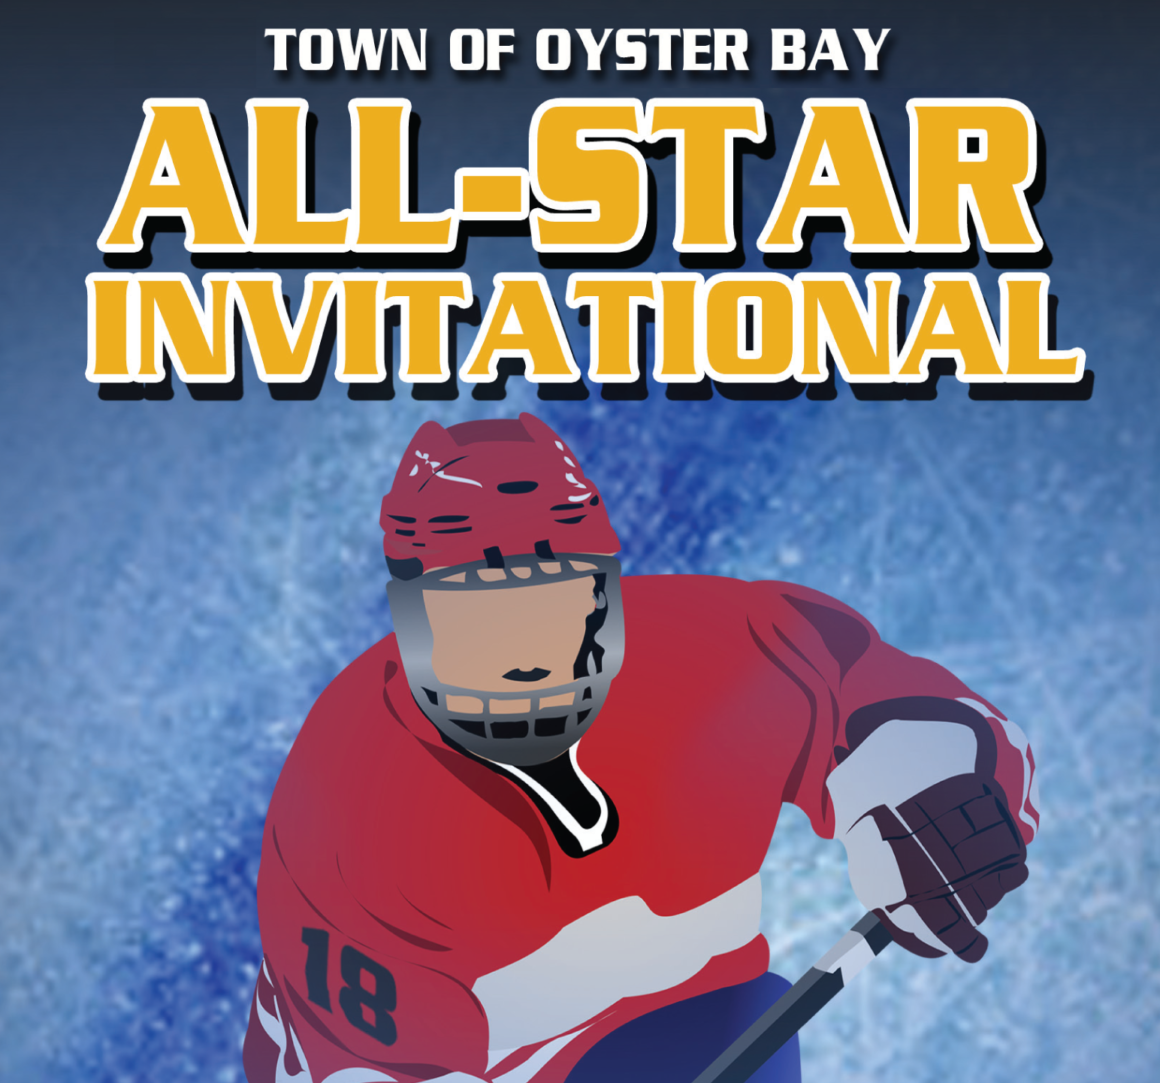 Town of Oyster Bay to Host Ice Hockey All-Star Invitational